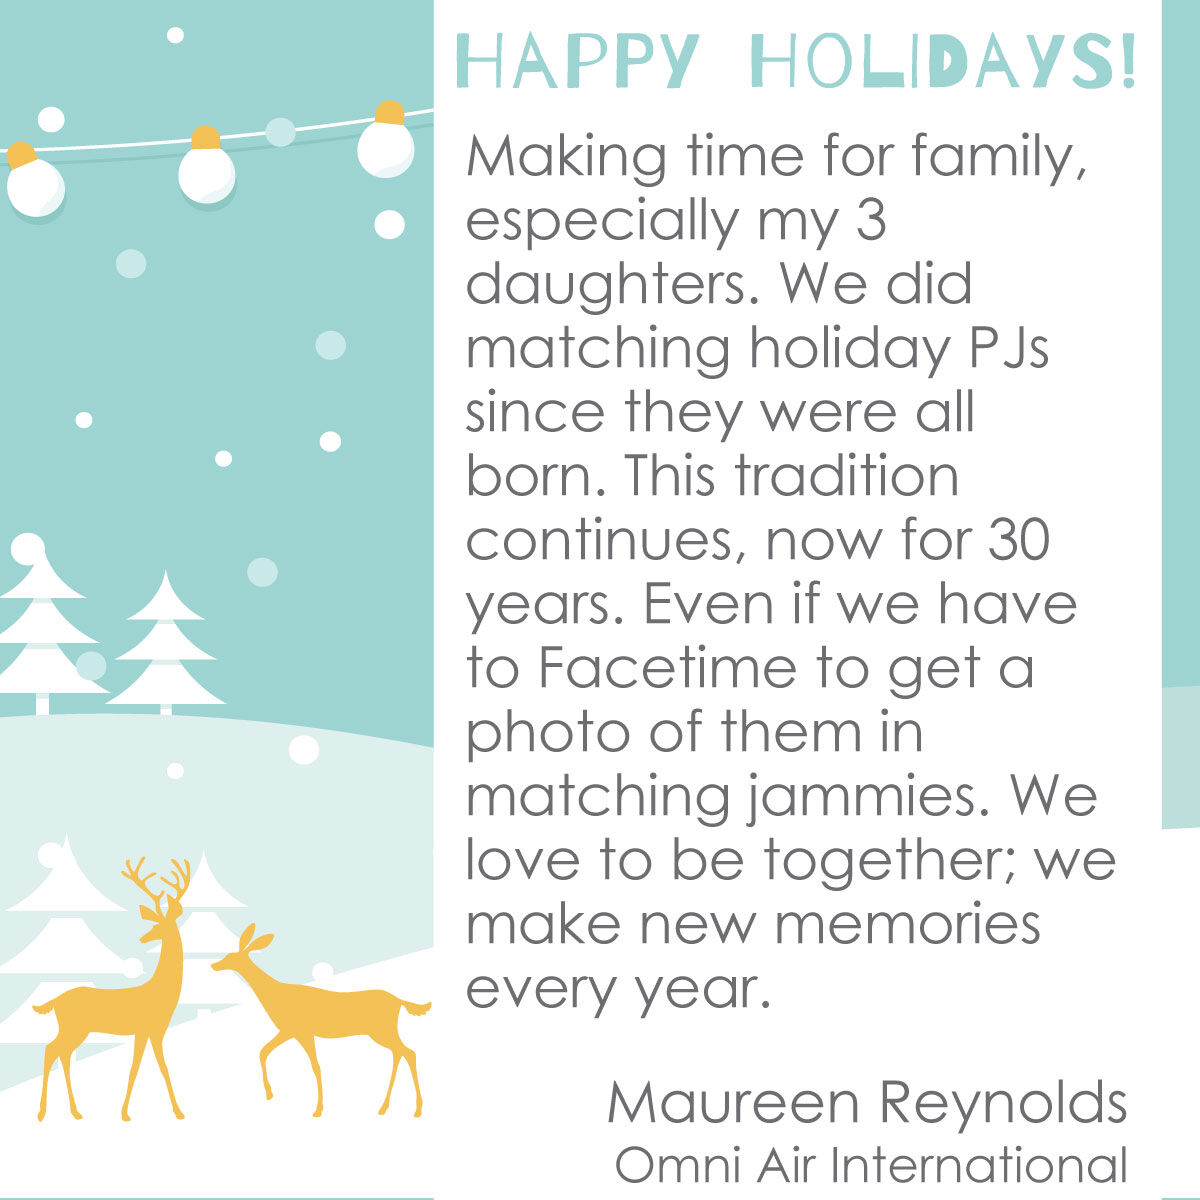 We asked our employees to share their favorite holiday memories and traditions. Check back the rest of the week to read some of their stories! #holidays #memories